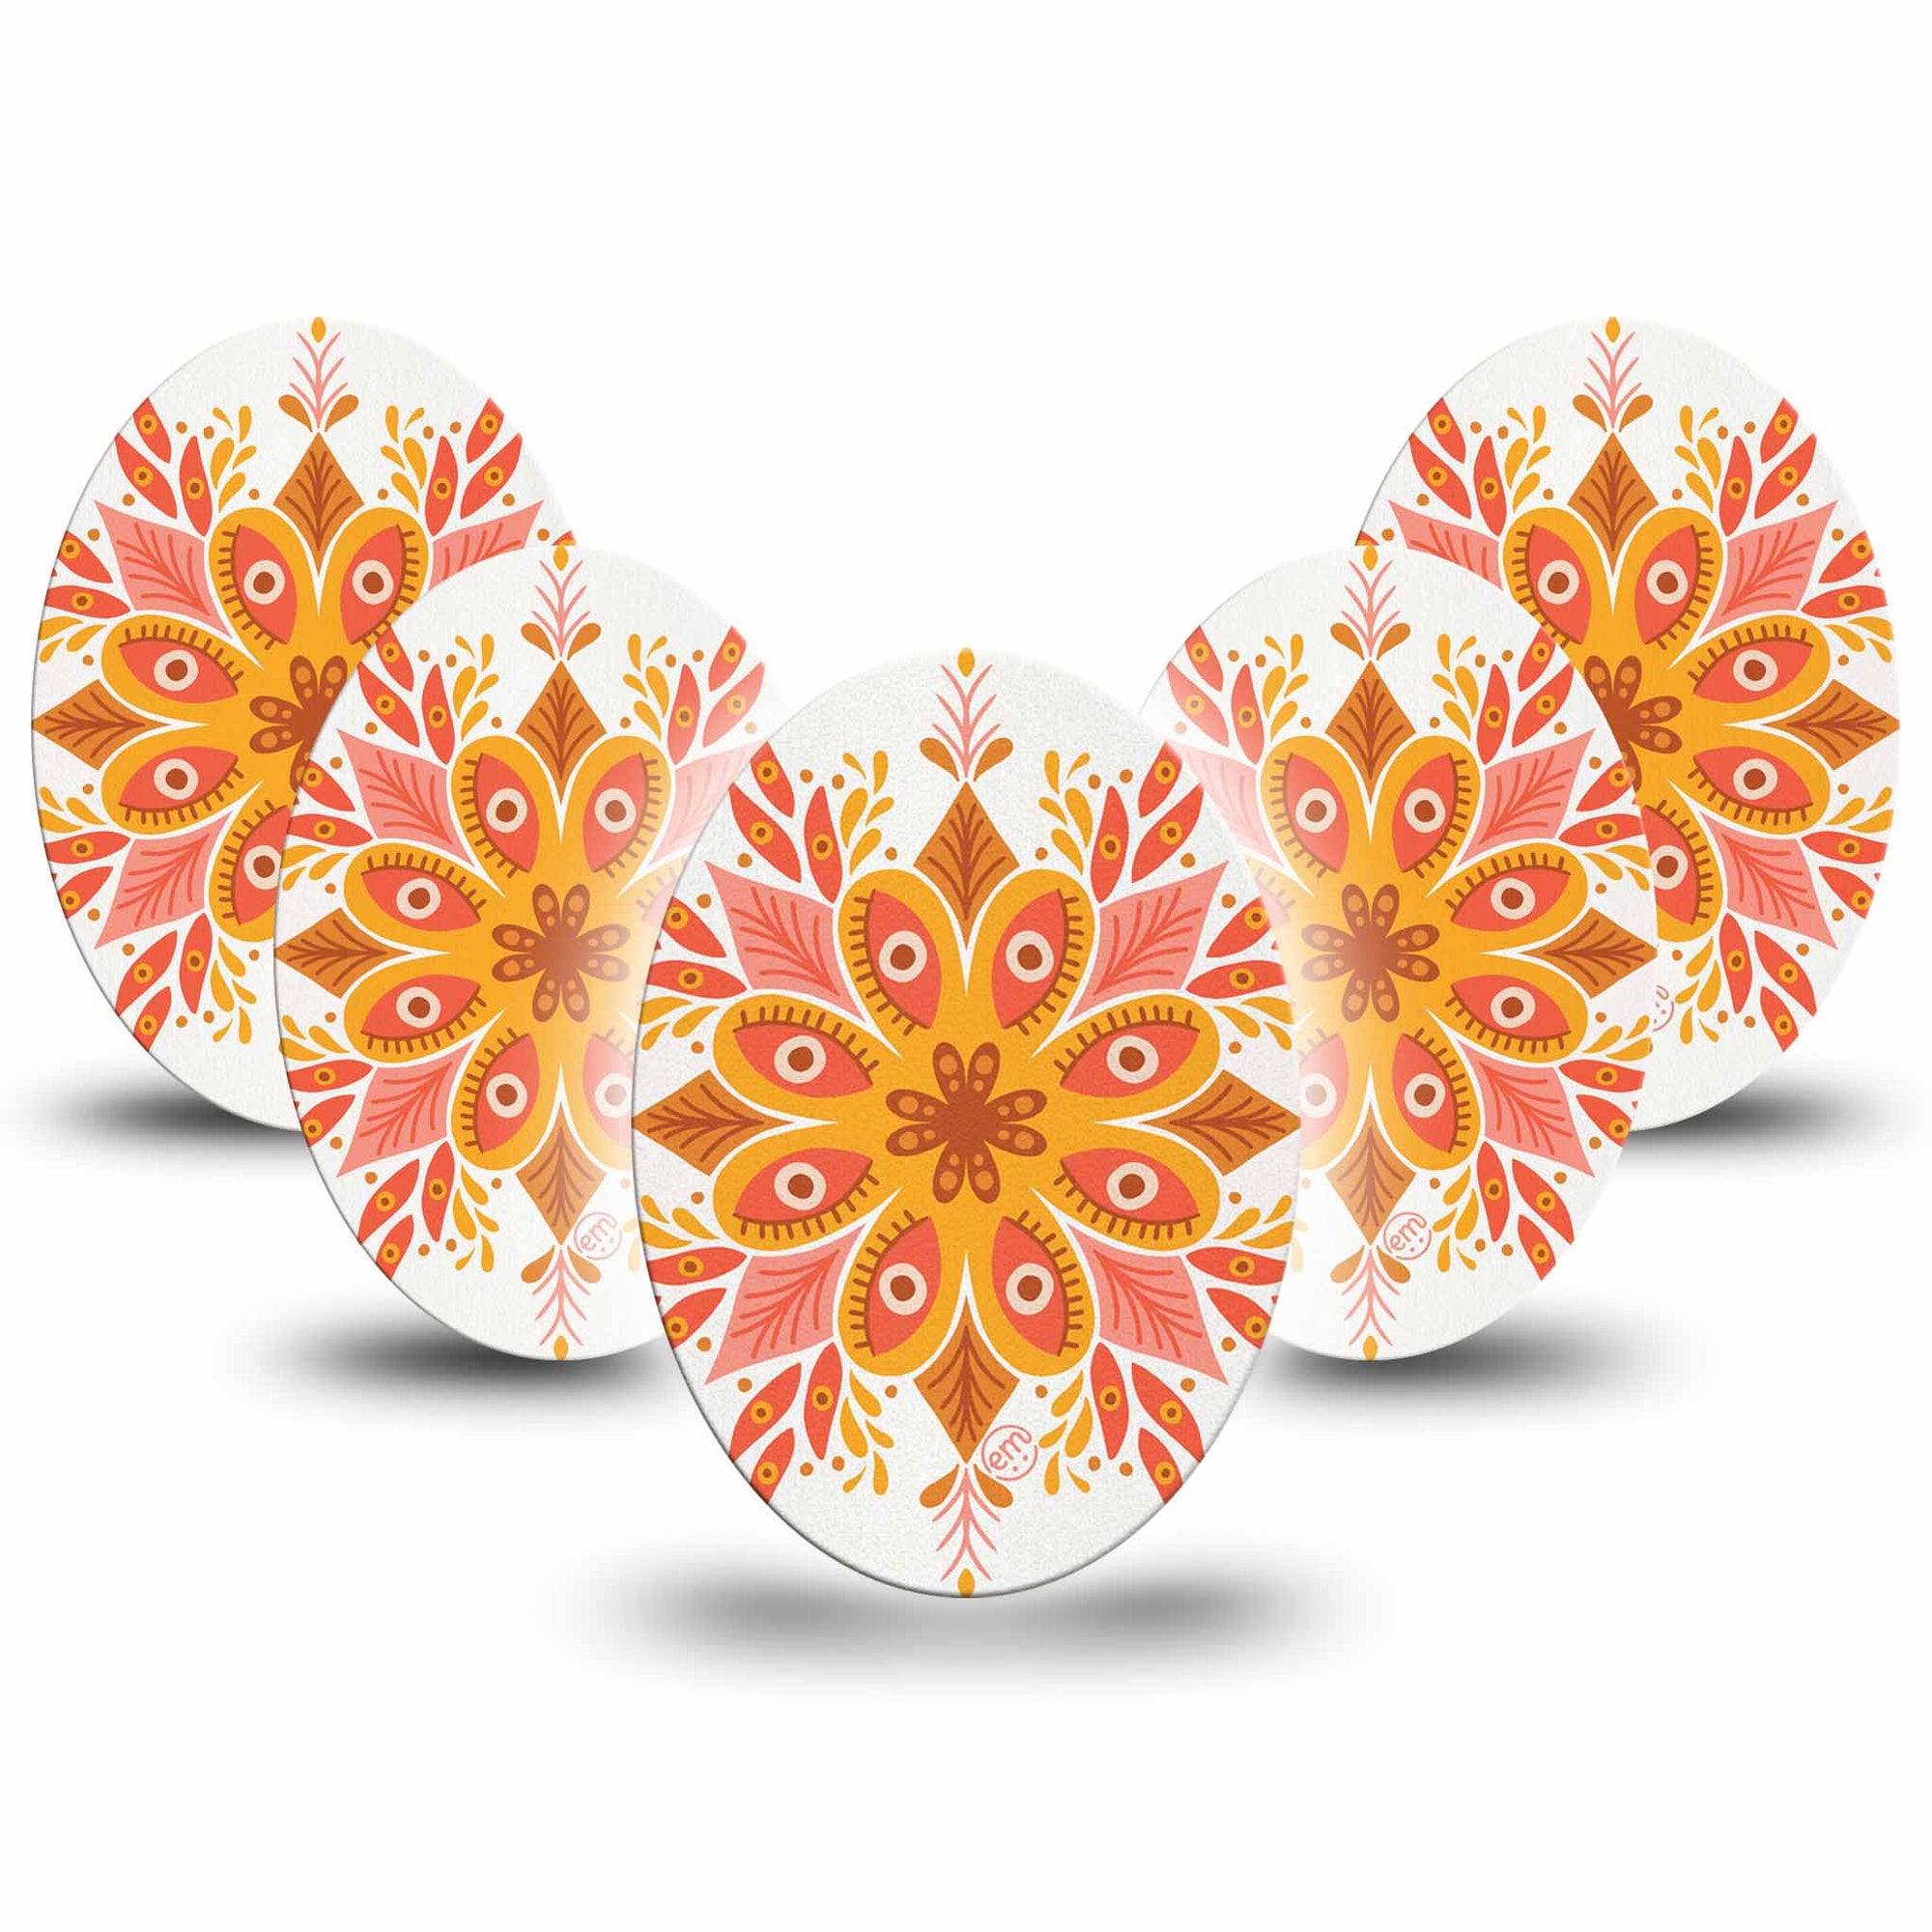 ExpressionMed Psychedelic Mandala Medtronic Enlite Guardian Universal Oval 5-Pack, Orange and Yellow Design, Medtronic Continuous Glucose Monitor, Adhesive Tape Design